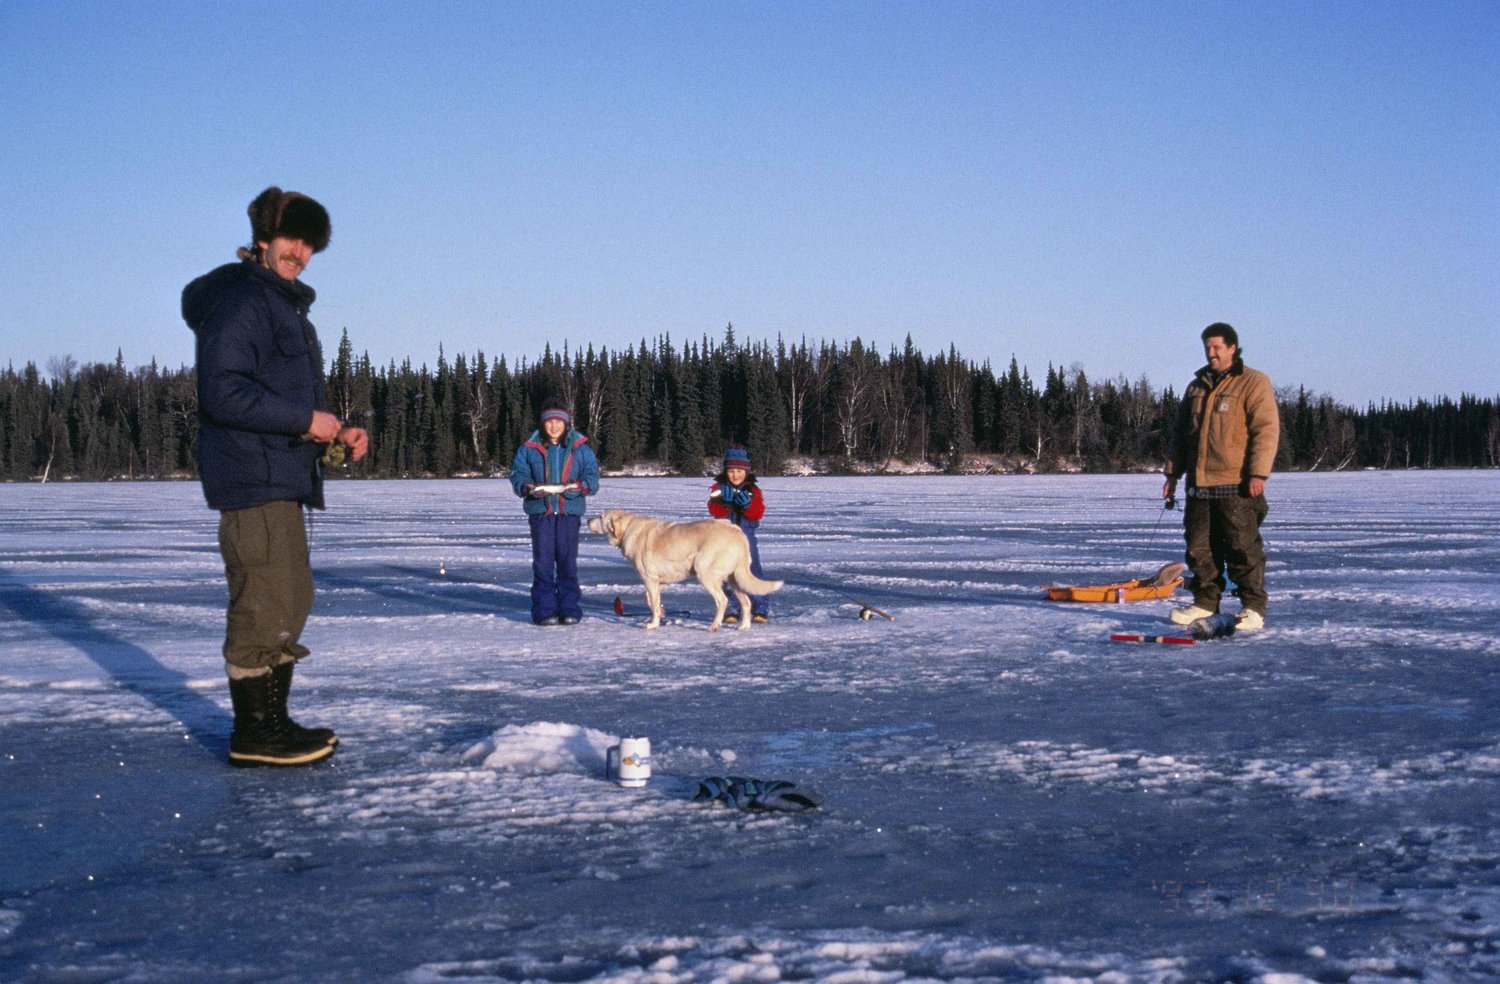 Two men, kids, and a dog enjoy ice fishing.